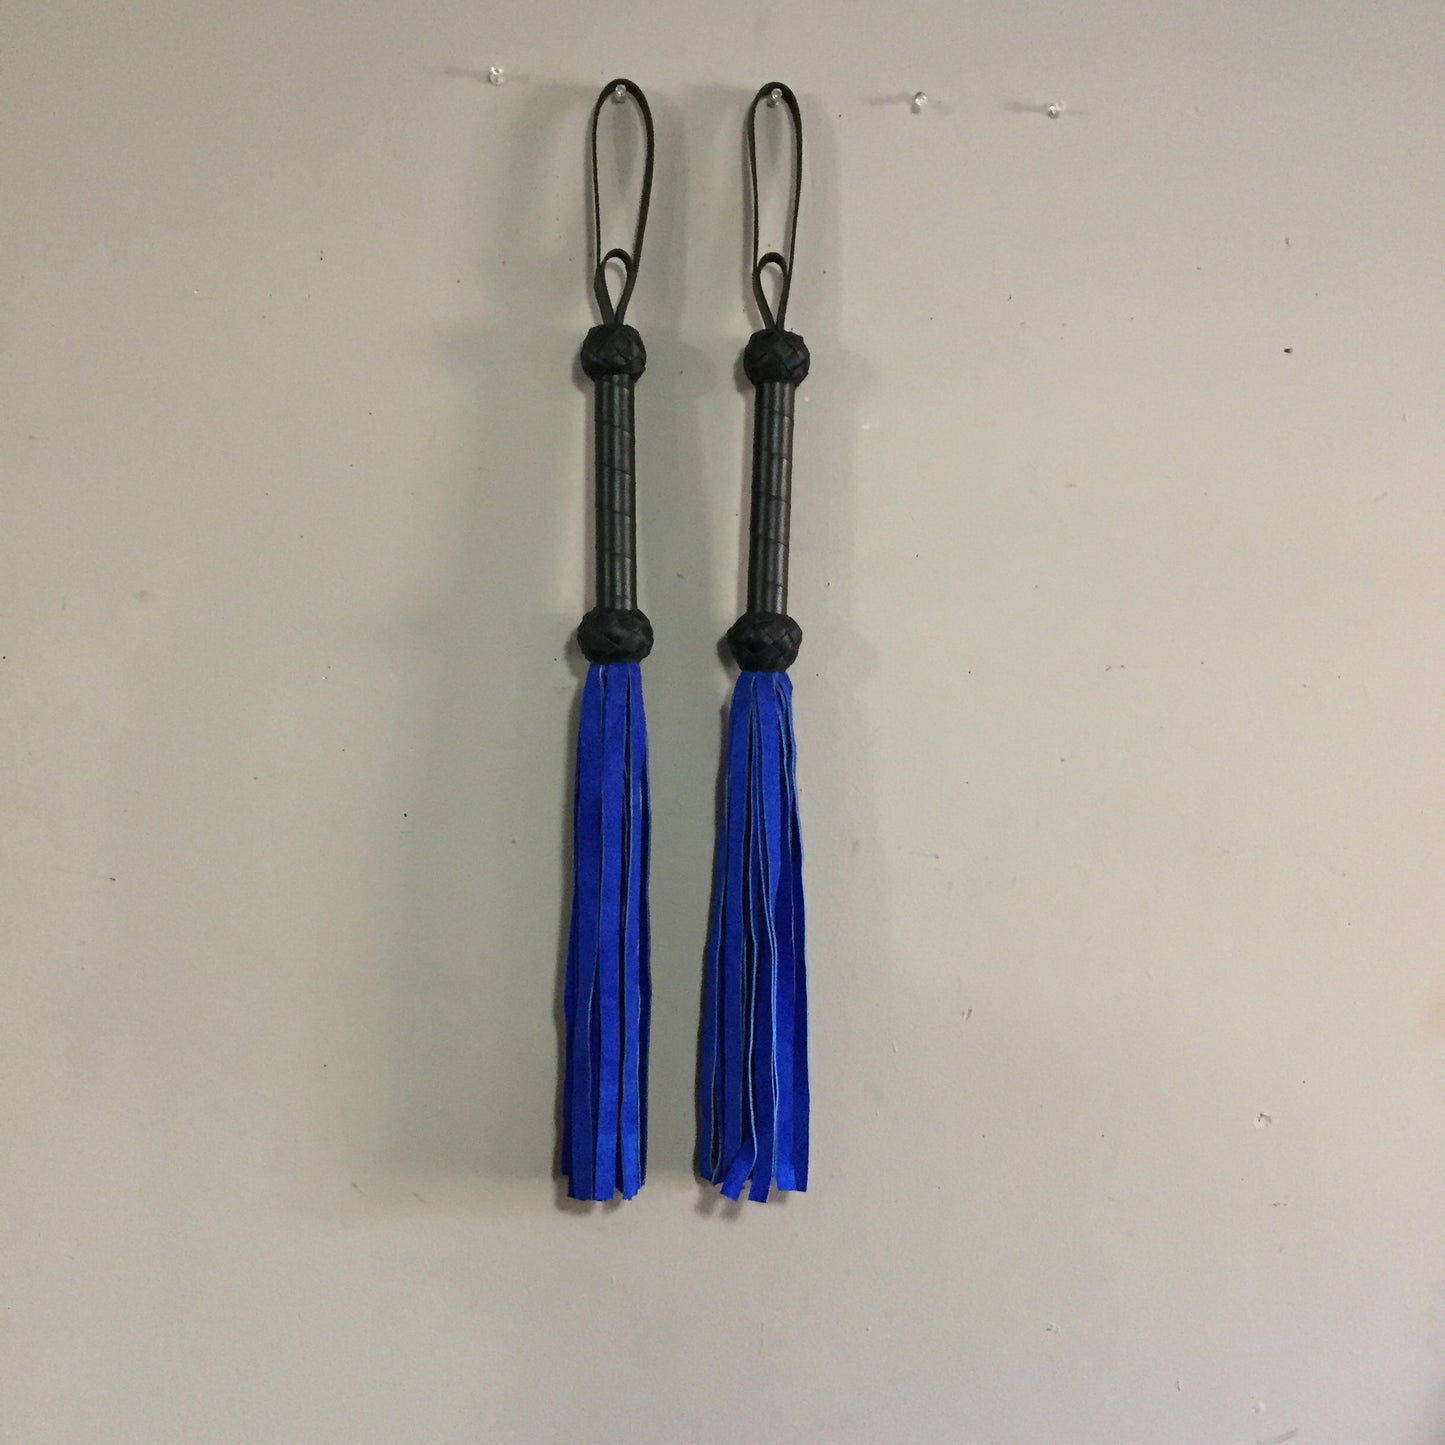 A pair of Royal Blue Basic Suede Floggers.